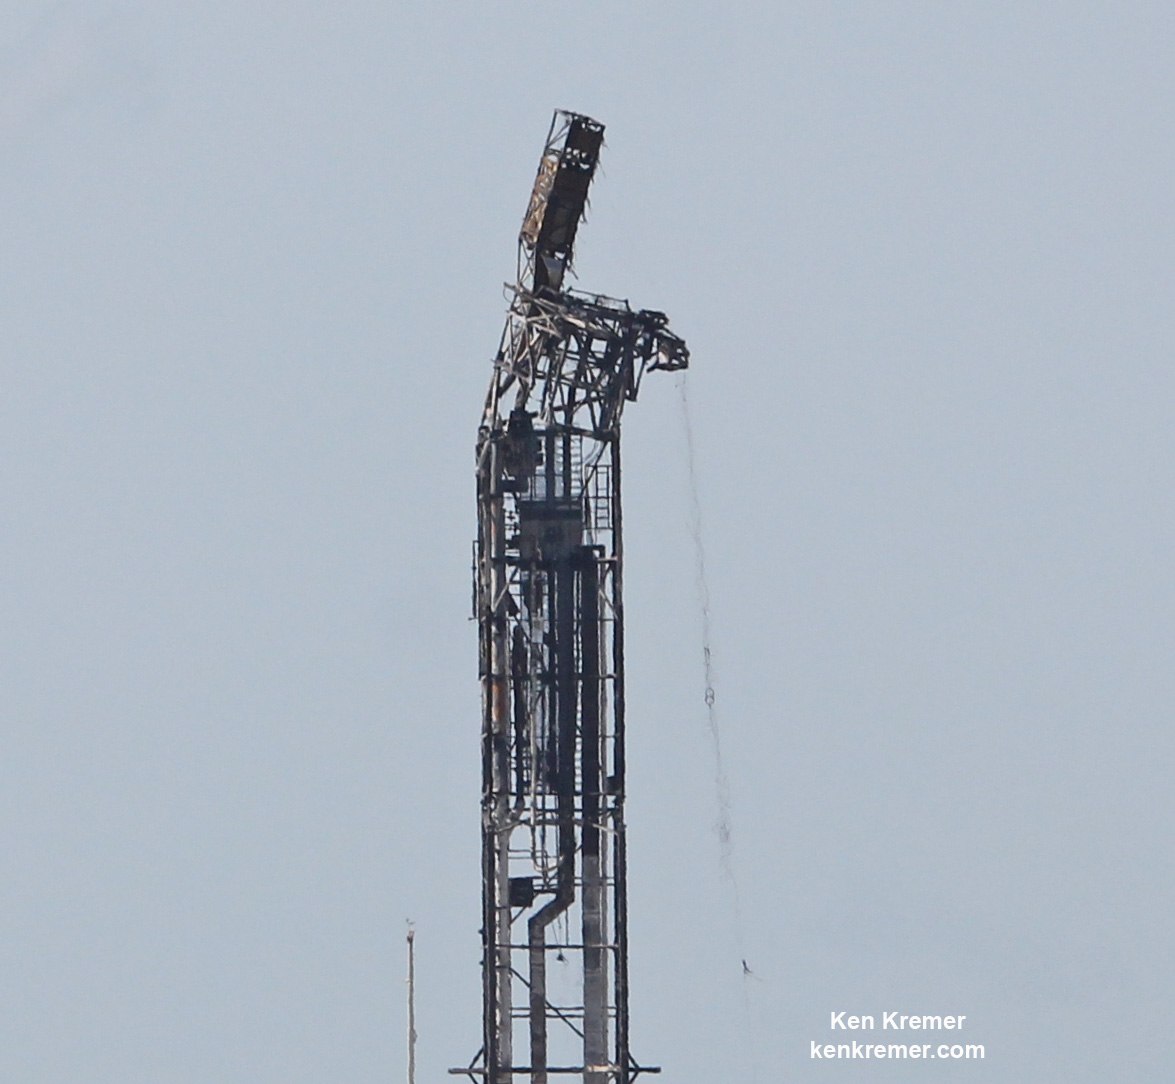 Up close view of top of mangled SpaceX Falcon 9 strongback with dangling cables (at right) as seen on Sept. 7 after prelaunch explosion destroyed the rocket and AMOS-6 payload at Space Launch Complex-40 at Cape Canaveral Air Force Station, FL on Sept. 1, 2016 . Credit: Ken Kremer/kenkremer.com